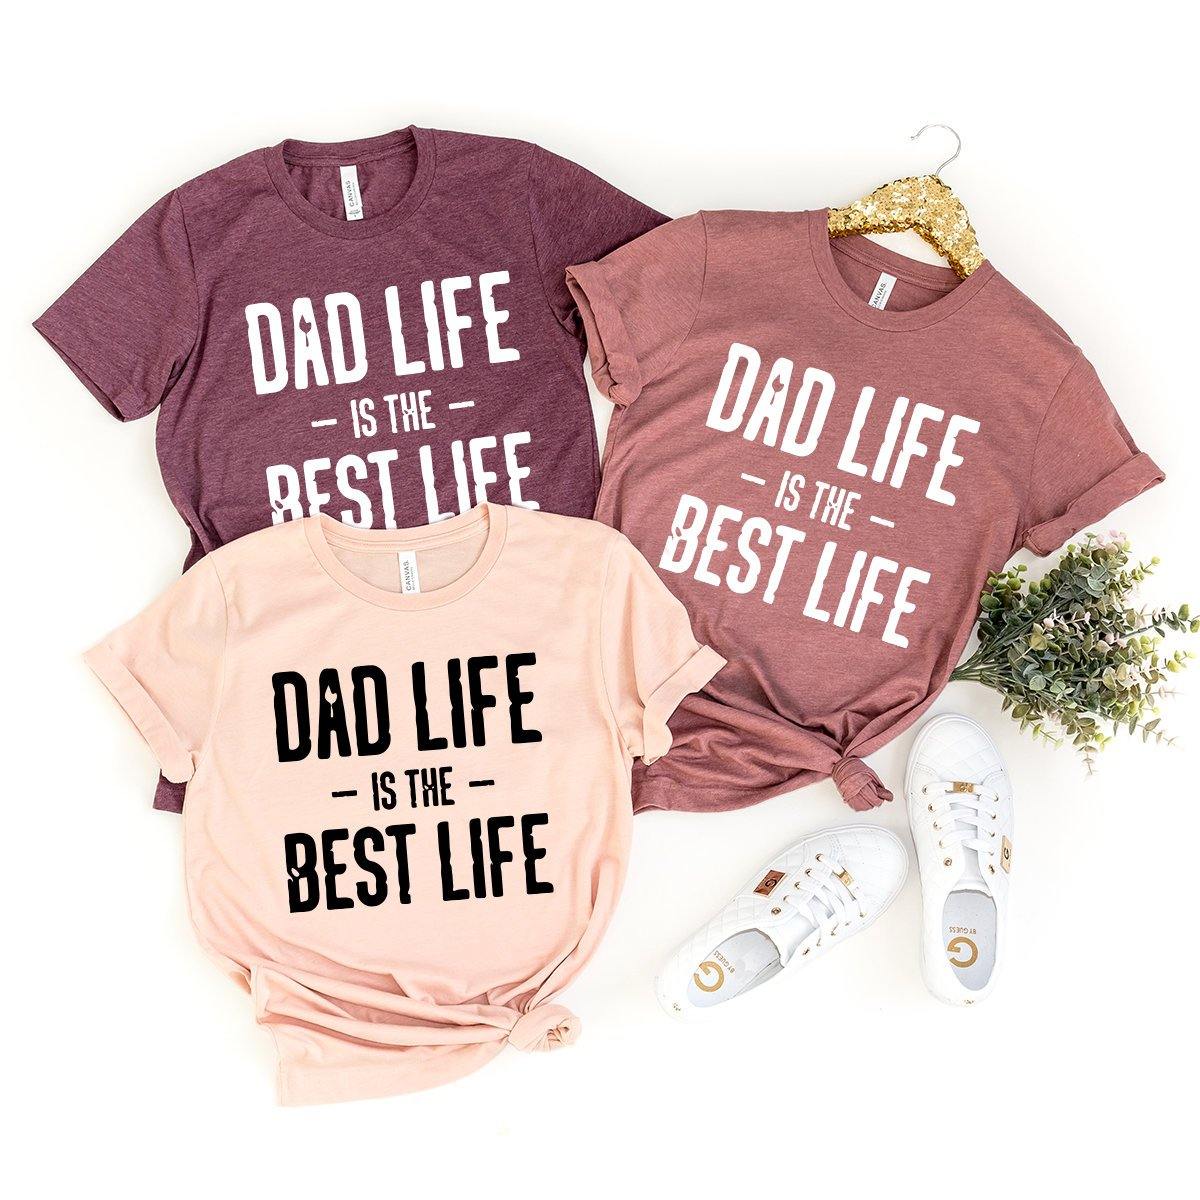 Dad Life Shirt, Dad Shirt, Dad Life Is The Best Life Shirt, Funny Dad Shirt, Dad Birthday Gift, Fathers Day Shirt, Gift for Daddy, Dad Tee